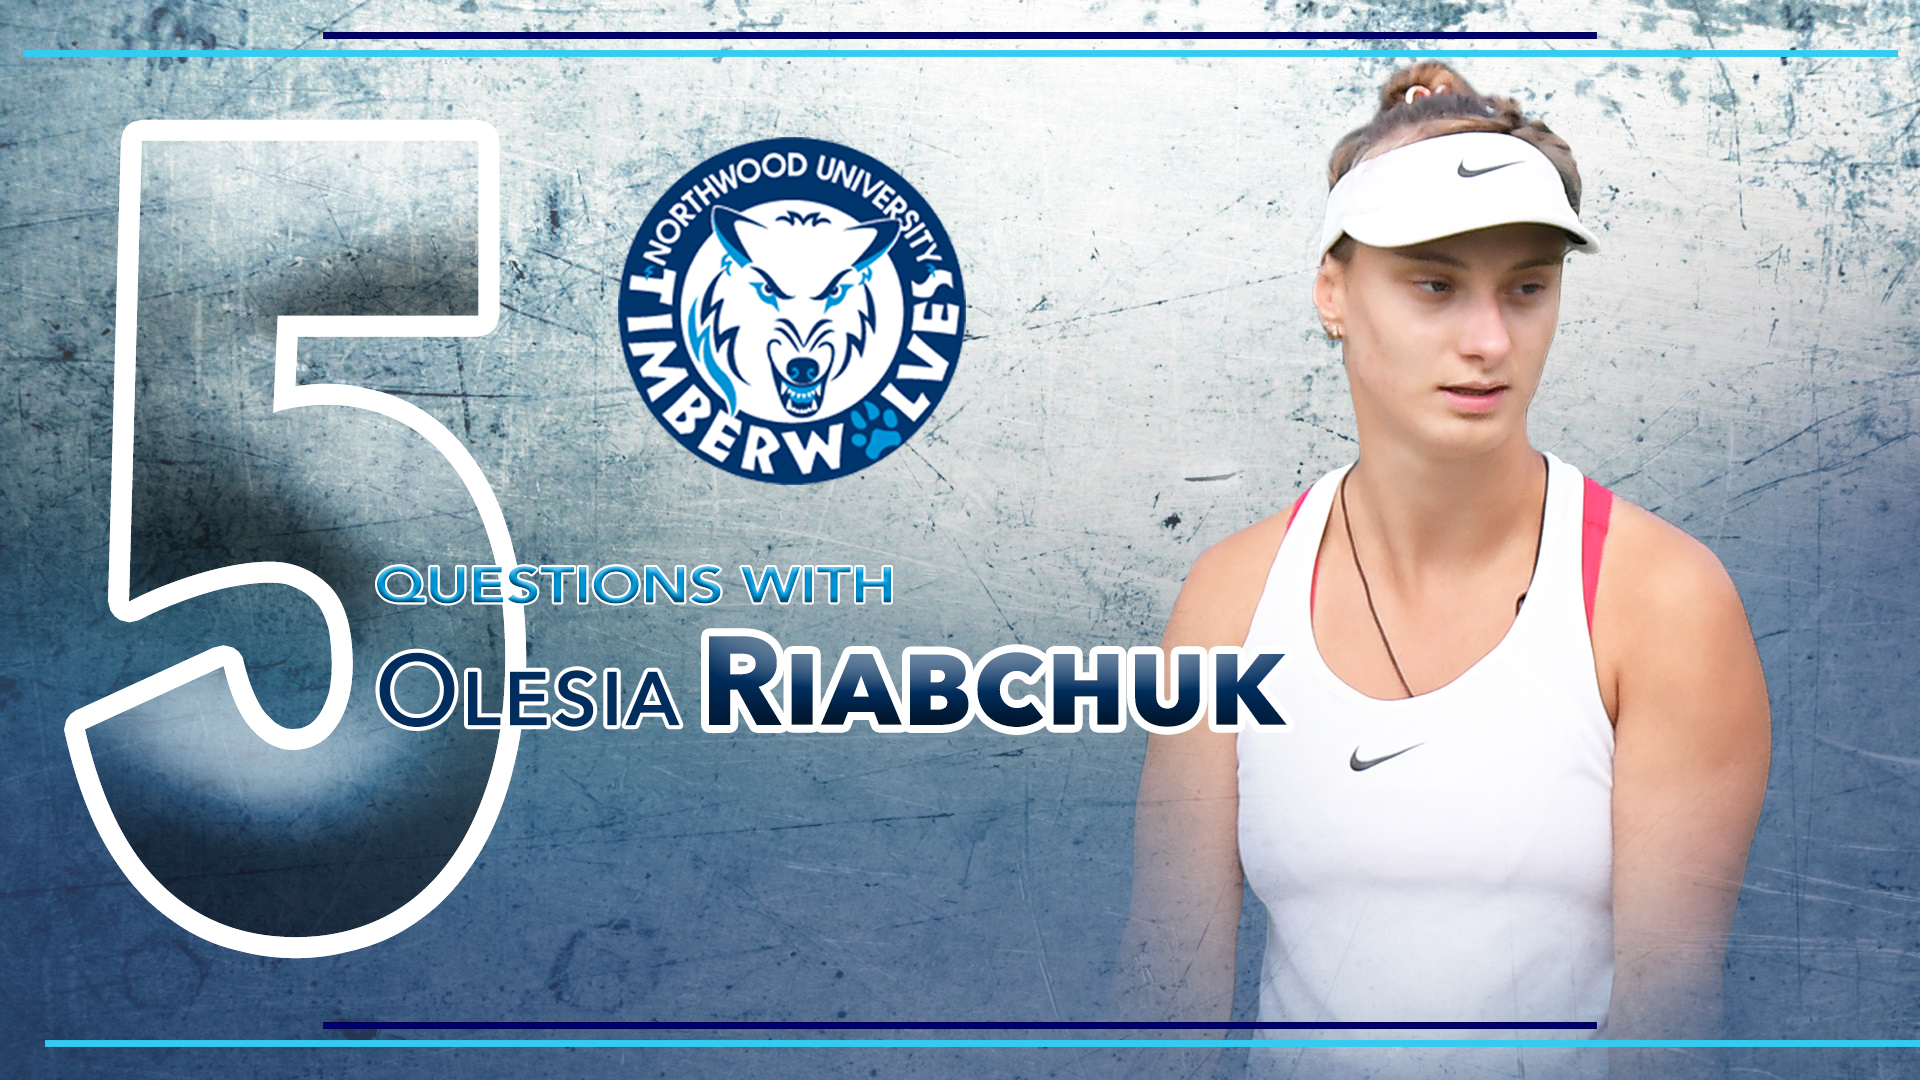 Northwood Athletics - 5 Questions with Olesia Riabchuk